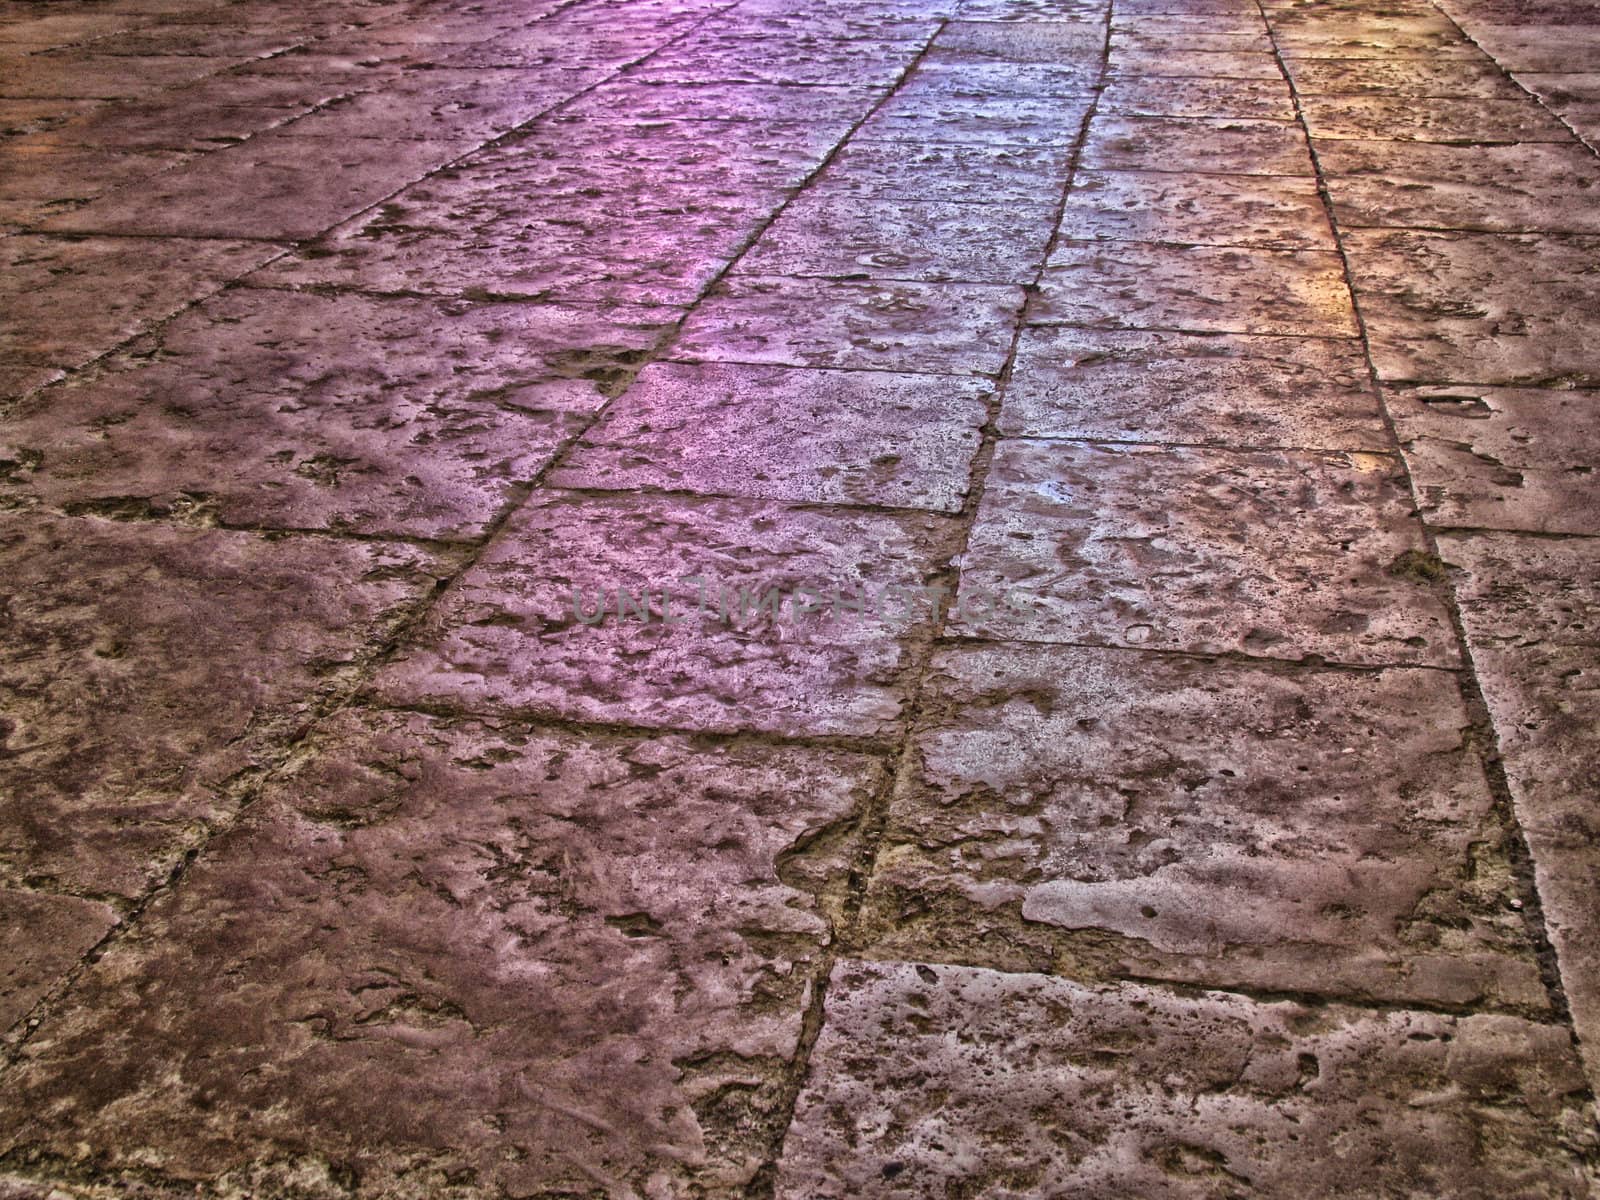 The very old floor of the cathedral of Metz, France. The colors are reflections from the mosaic windows.